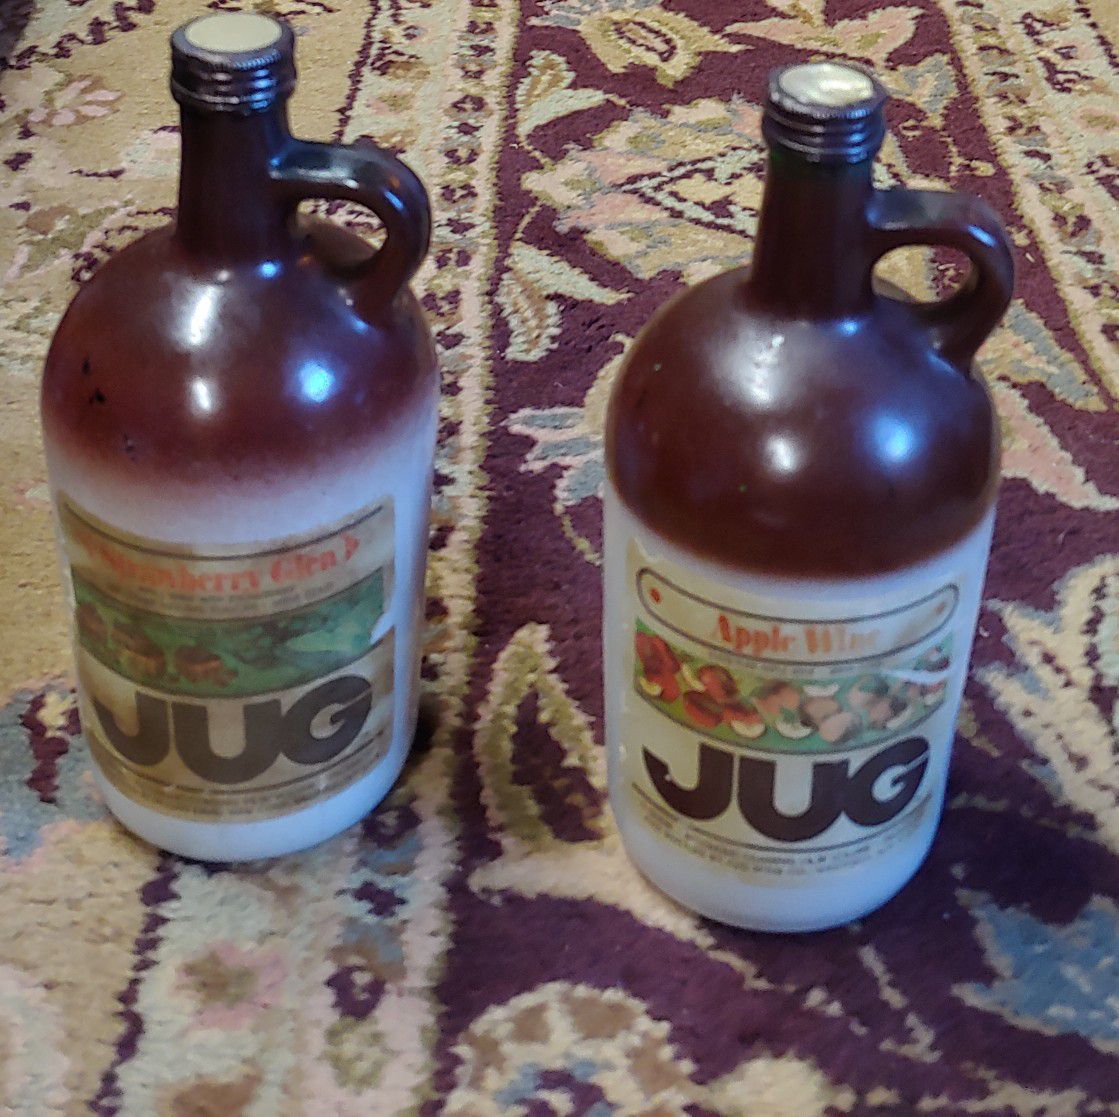 2 Vintage Wine Jugs, Jug Wine Co., Chicago USA, Strawberry Glen, Apple Wine, Empty Collectible Colored Glass Bottles